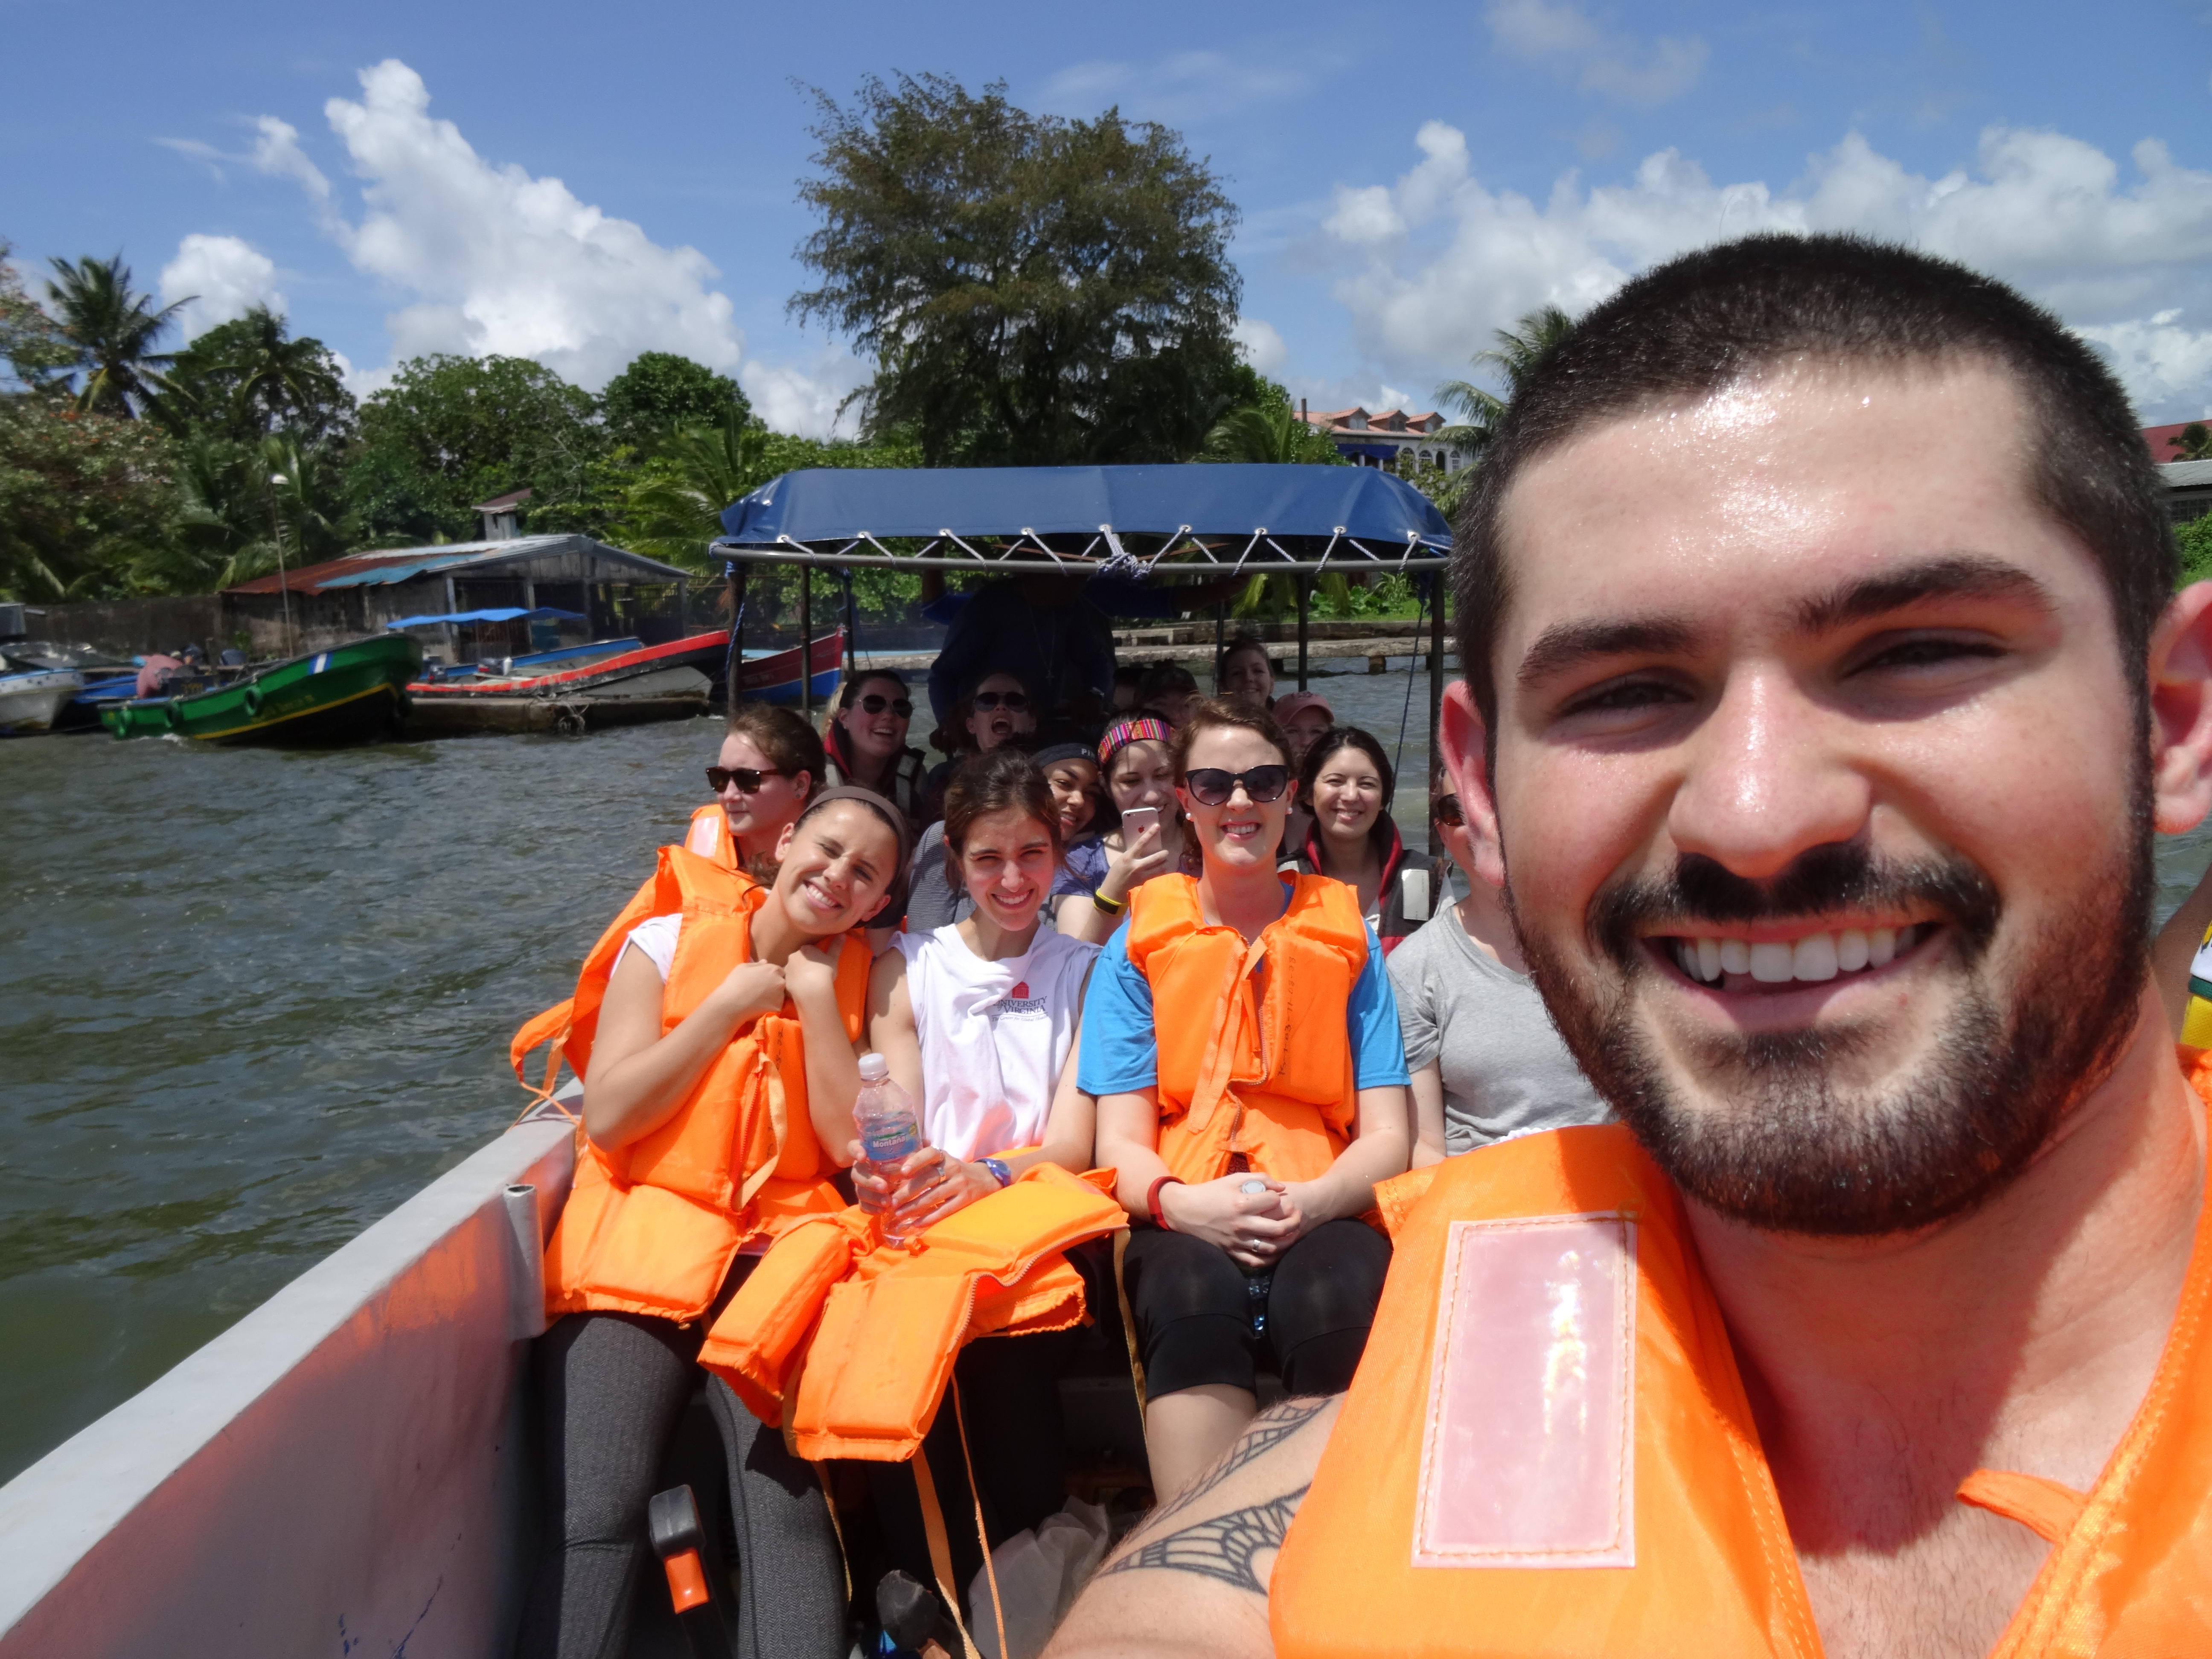 UVA students take time out for fun near Bluefields, Nicaragua